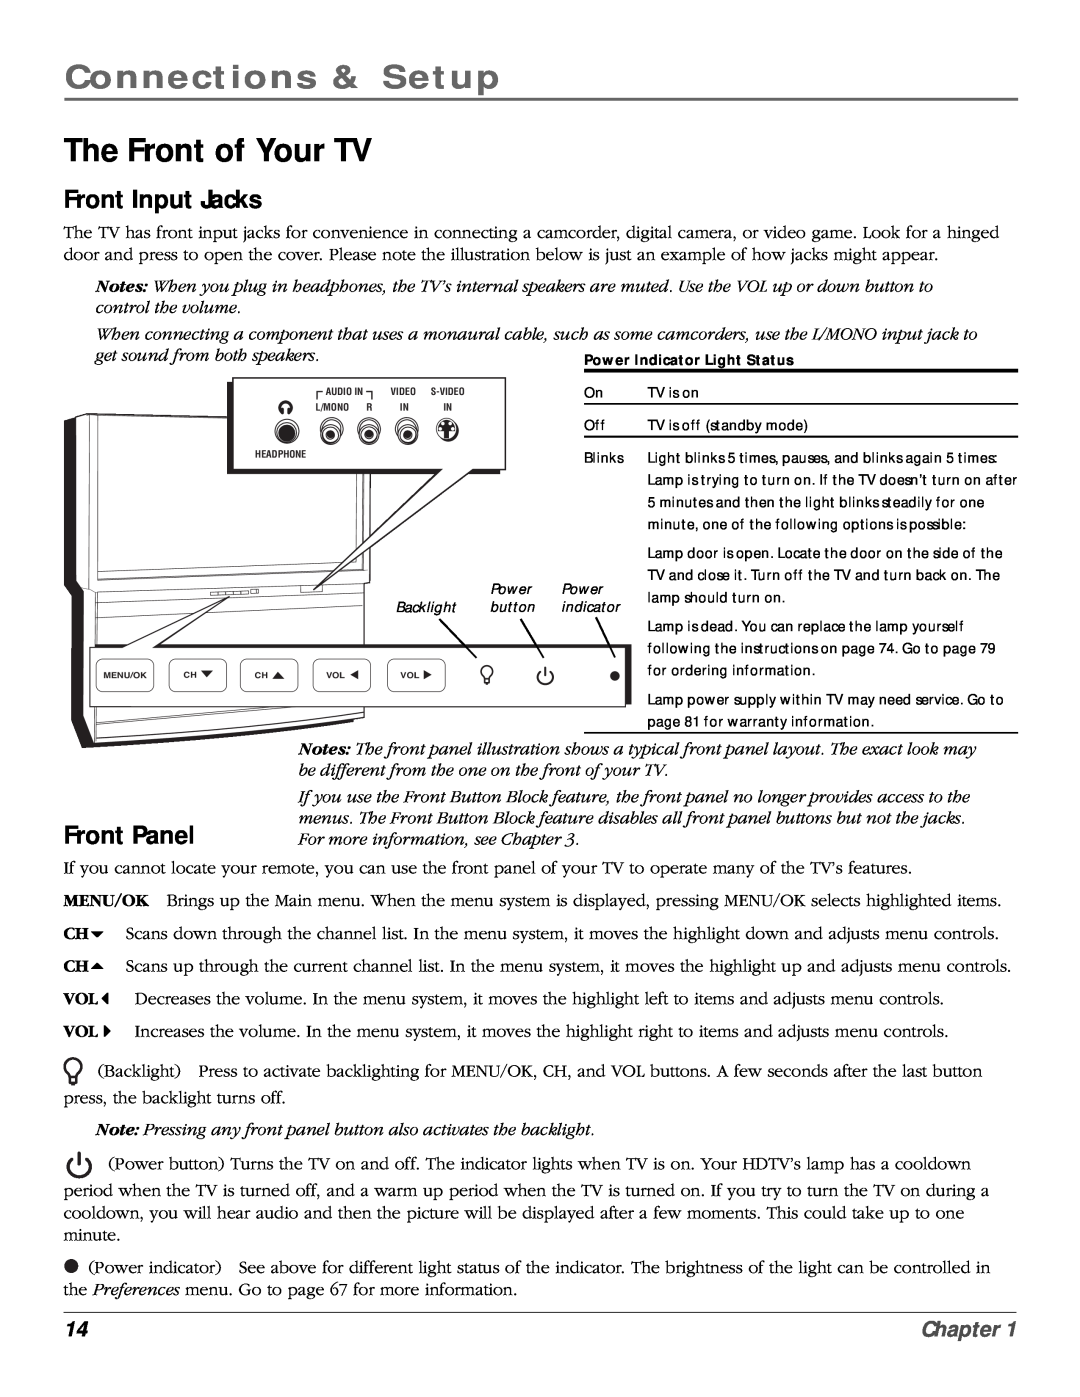 RCA scenium manual The Front of Your TV, Front Input Jacks, Front Panel, Connections & Setup, Chapter 